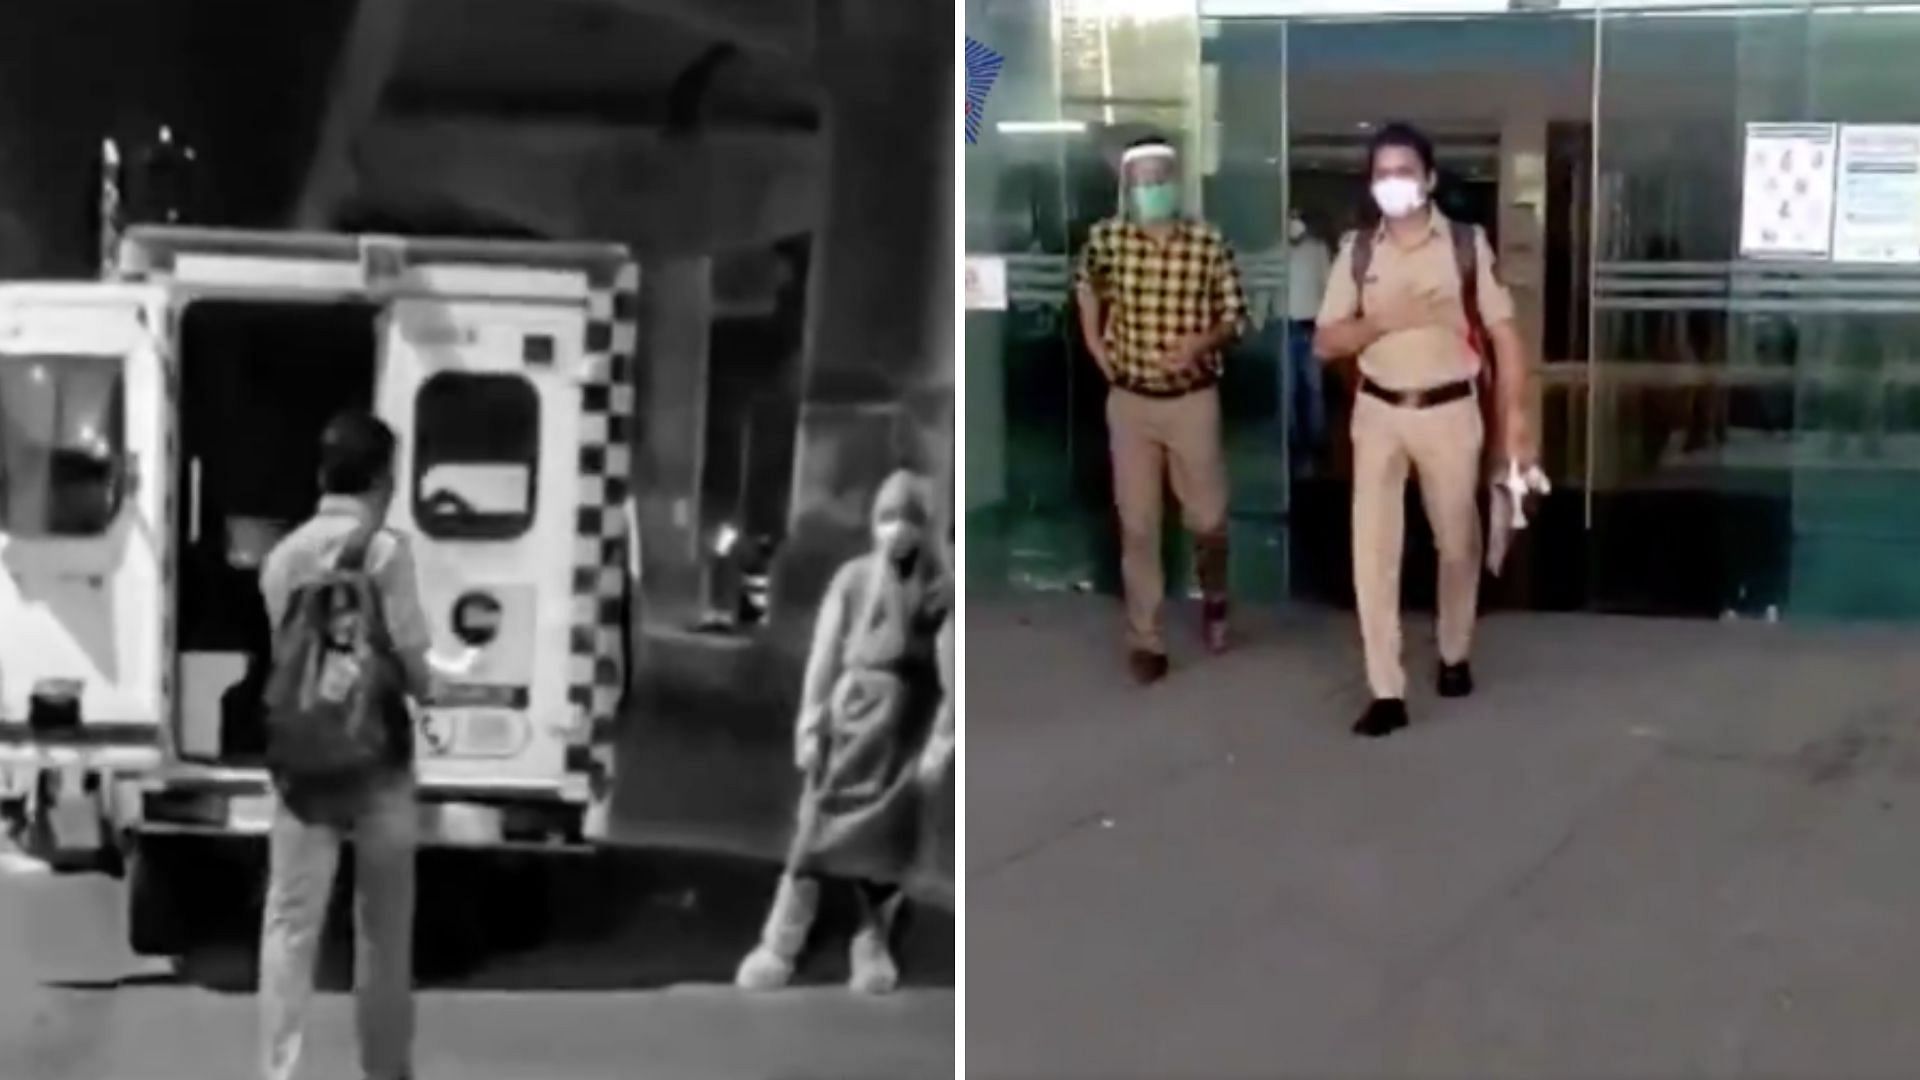 Mumbai cop returns to work after recovering from COVID-19